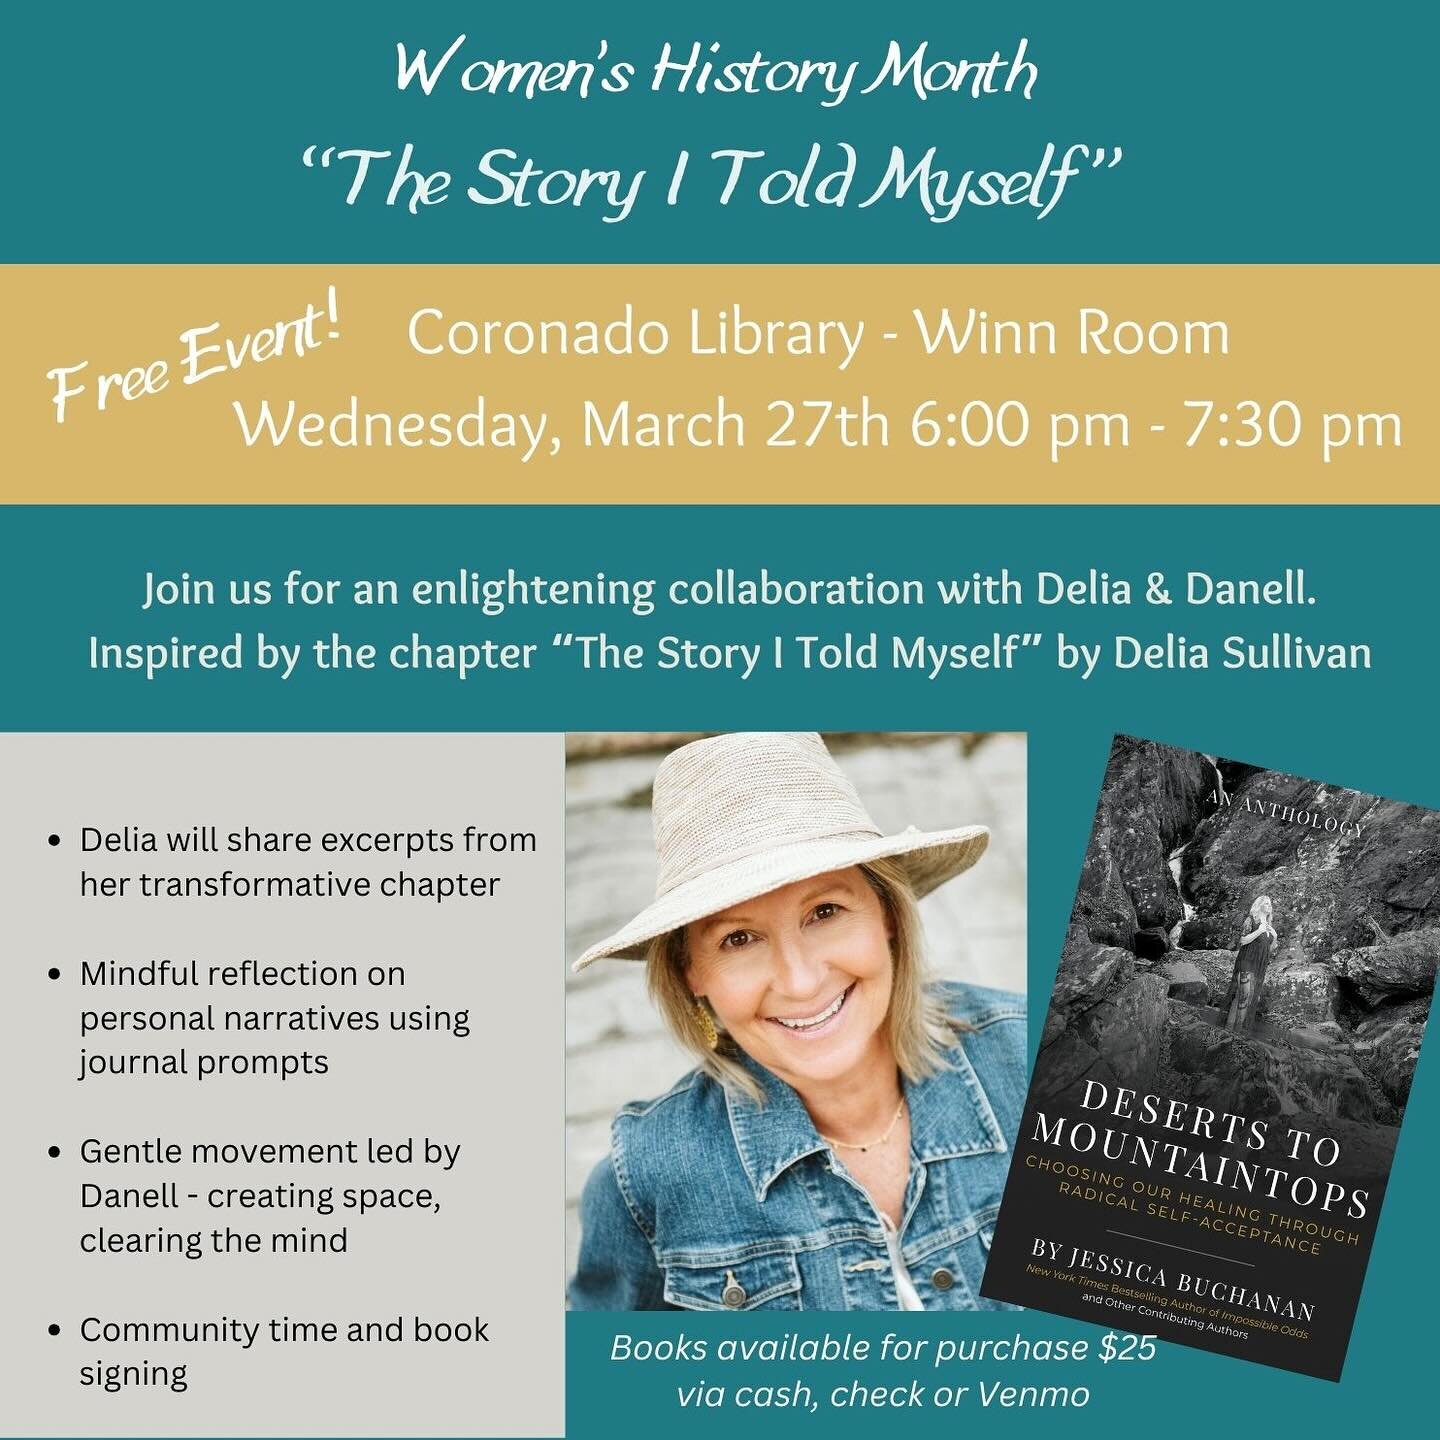 💫Thanks to all for spreading the word! 
See you this evening at the Coronado Library. 

Book Review 
&ldquo;It is not solely about what we say but, more importantly, what others hear and interpret, for in that exchange lies the true essence of conne